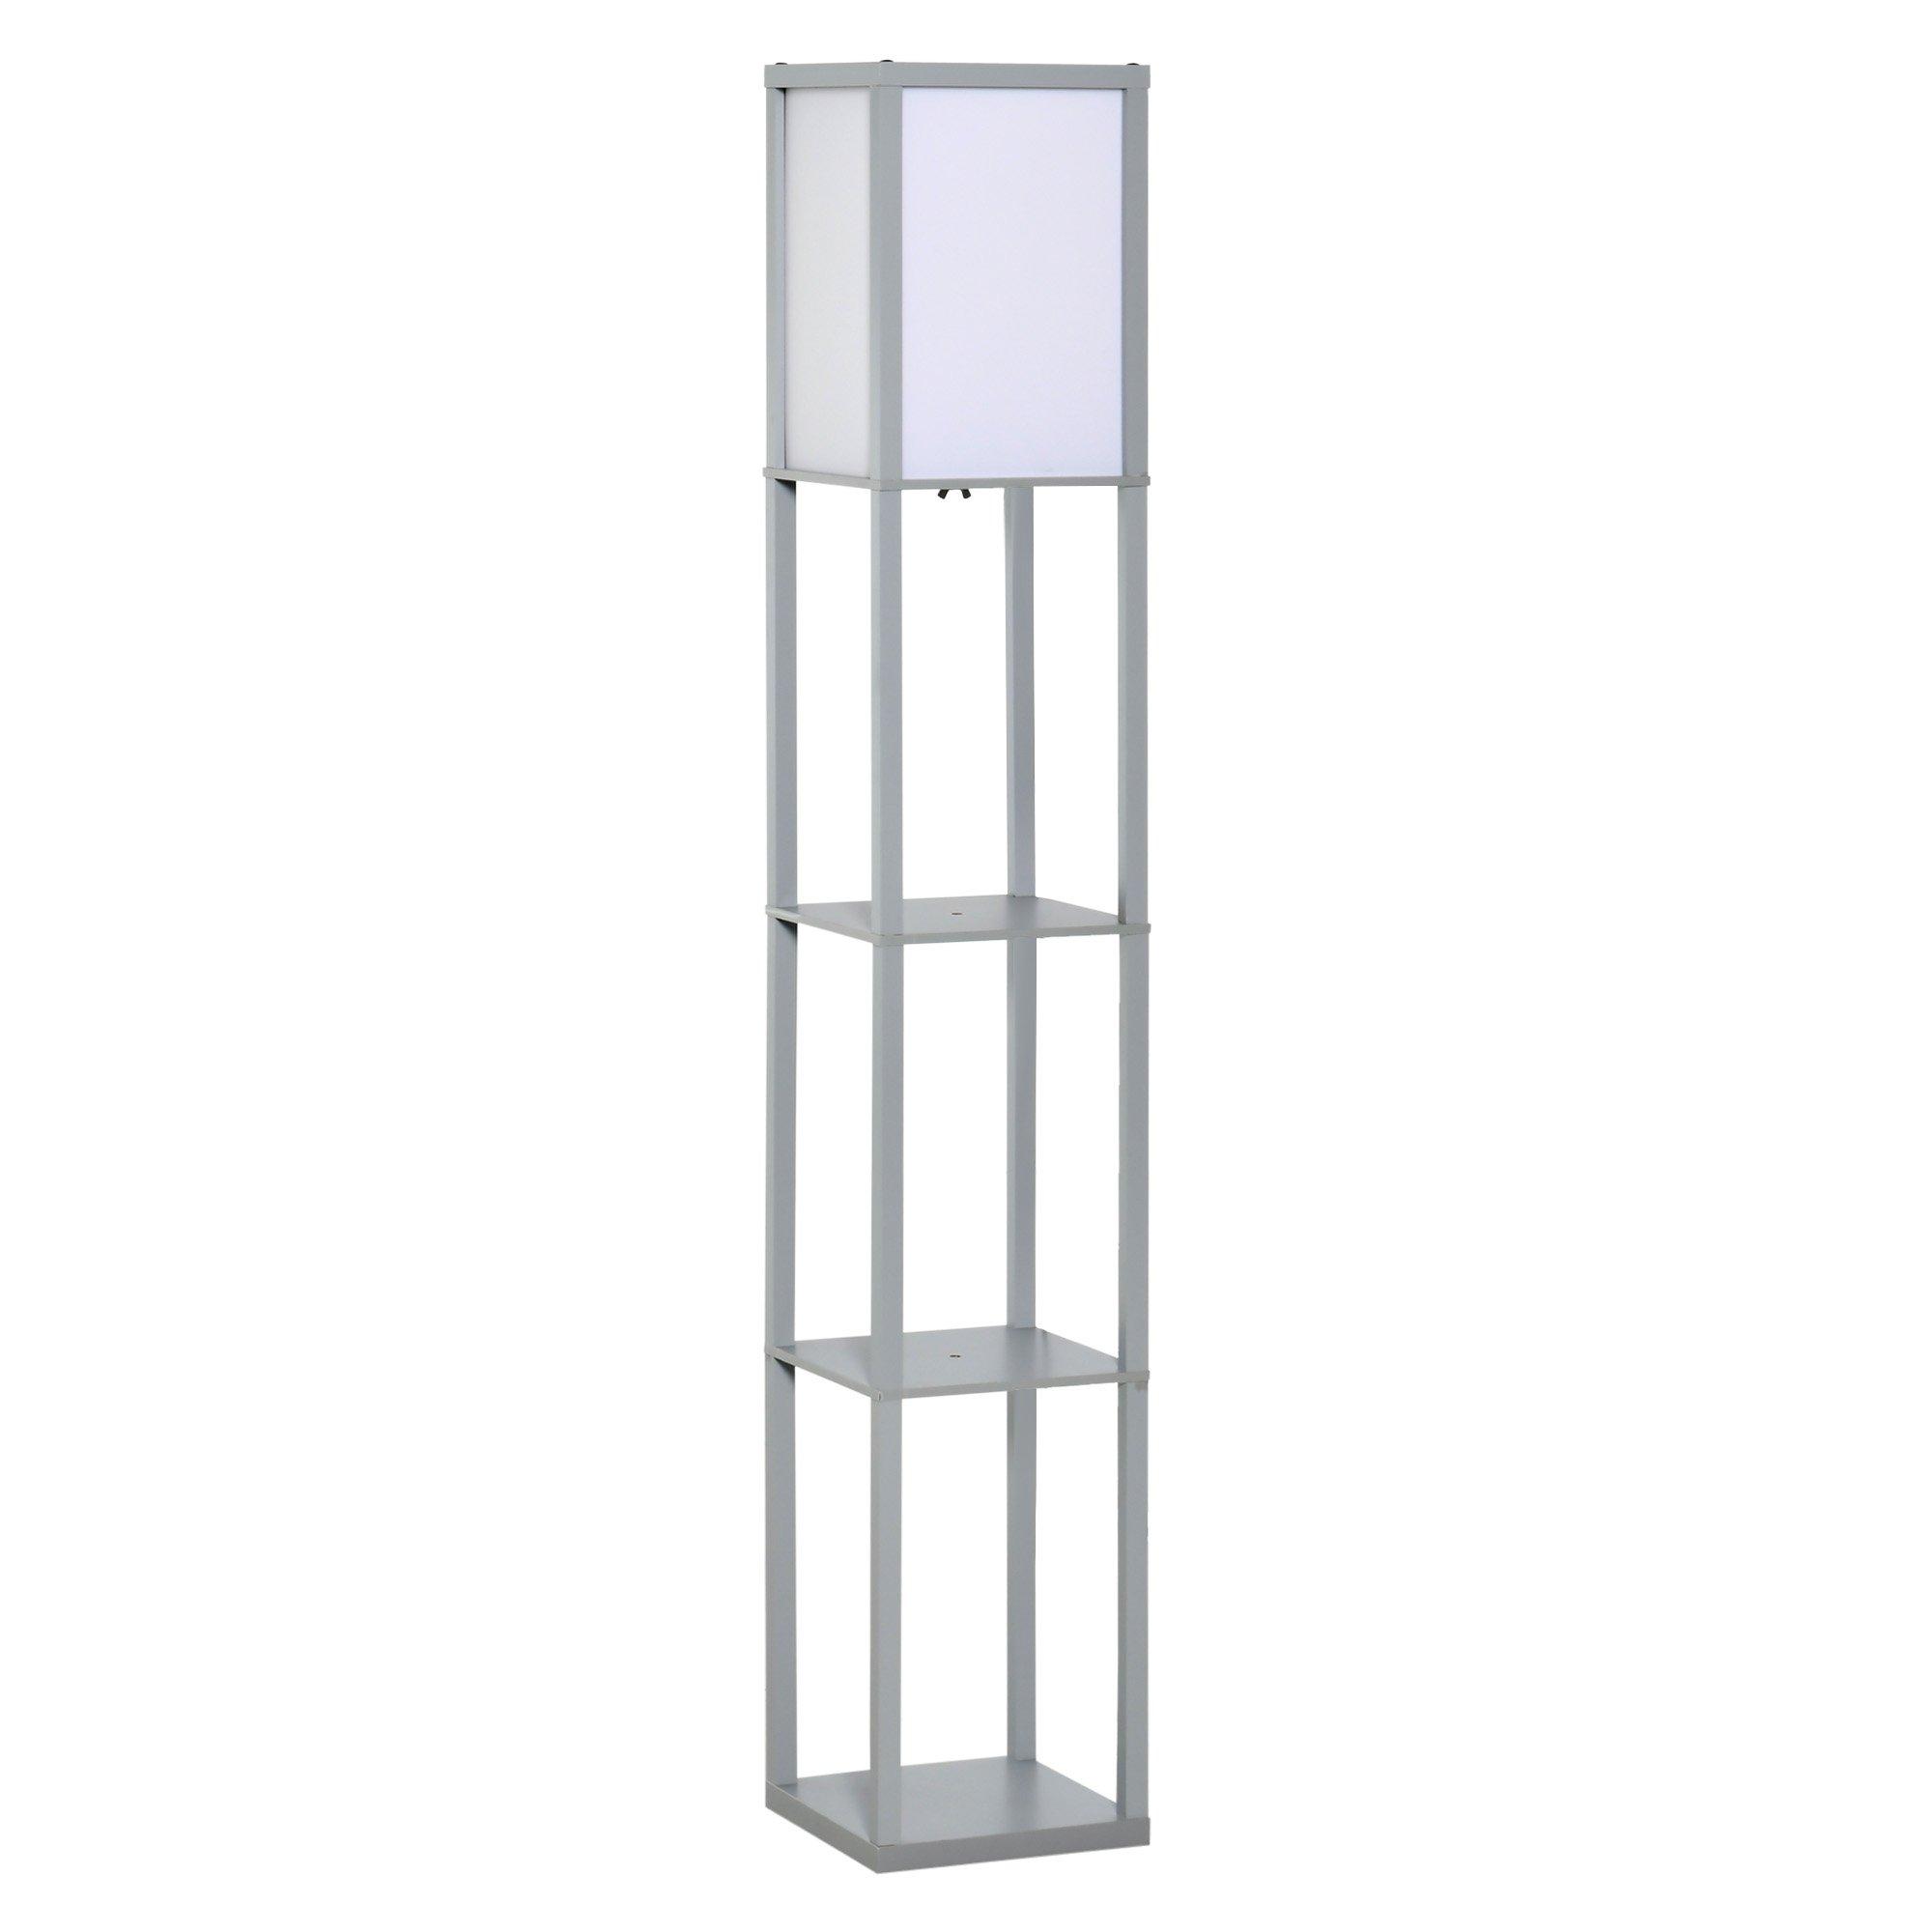 4 Tier Floor Lamp Standing Lamp with Storage Shelf for Home Office